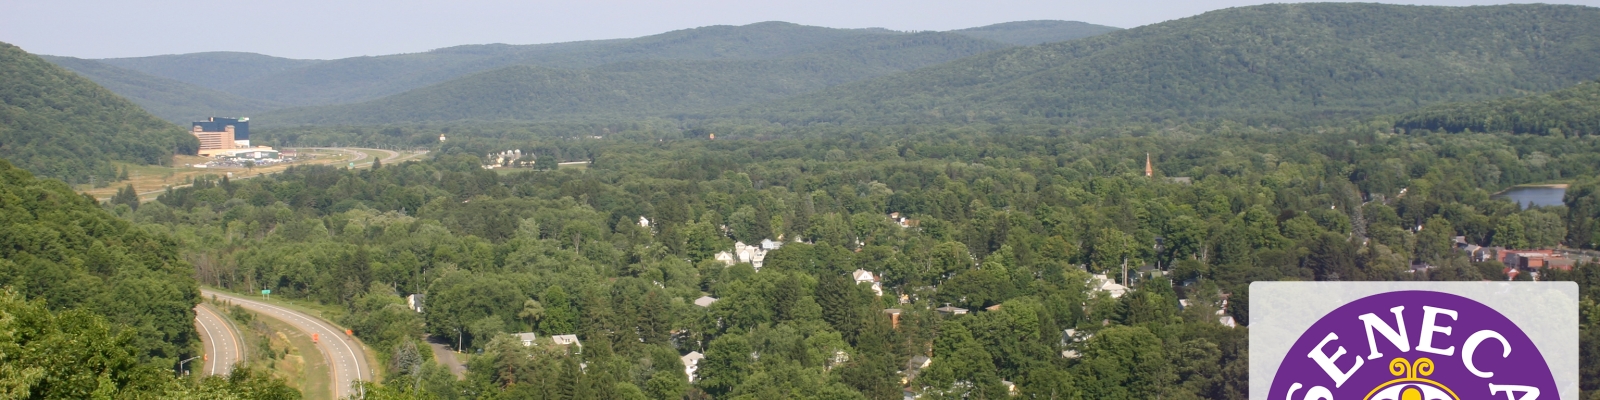 A view from an overlook in Salamanca, NY on 2007-08-05